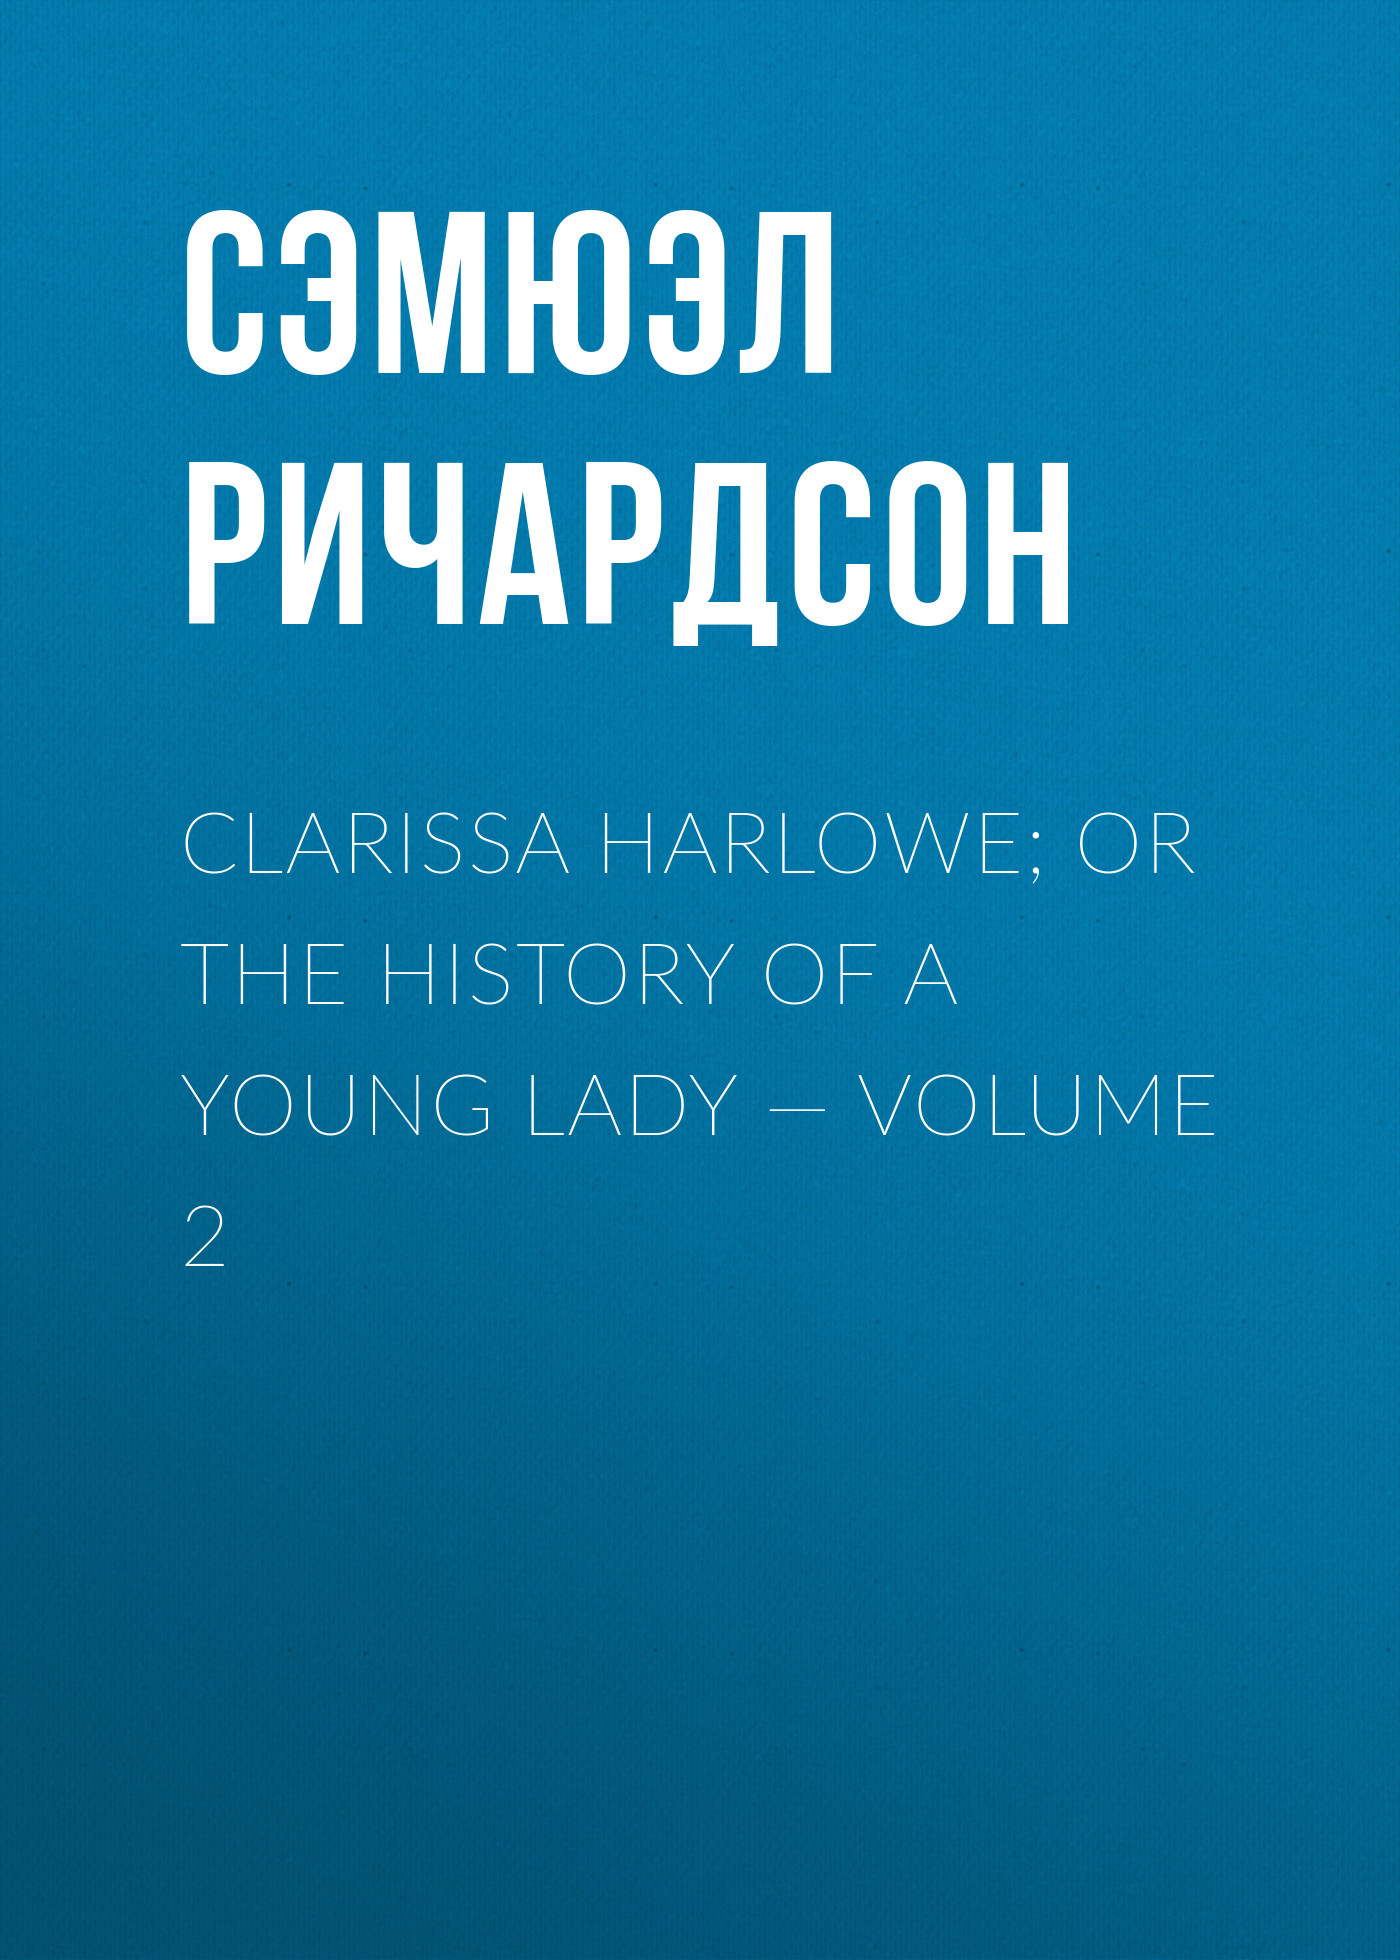 Clarissa Harlowe; or the history of a young lady— Volume 2